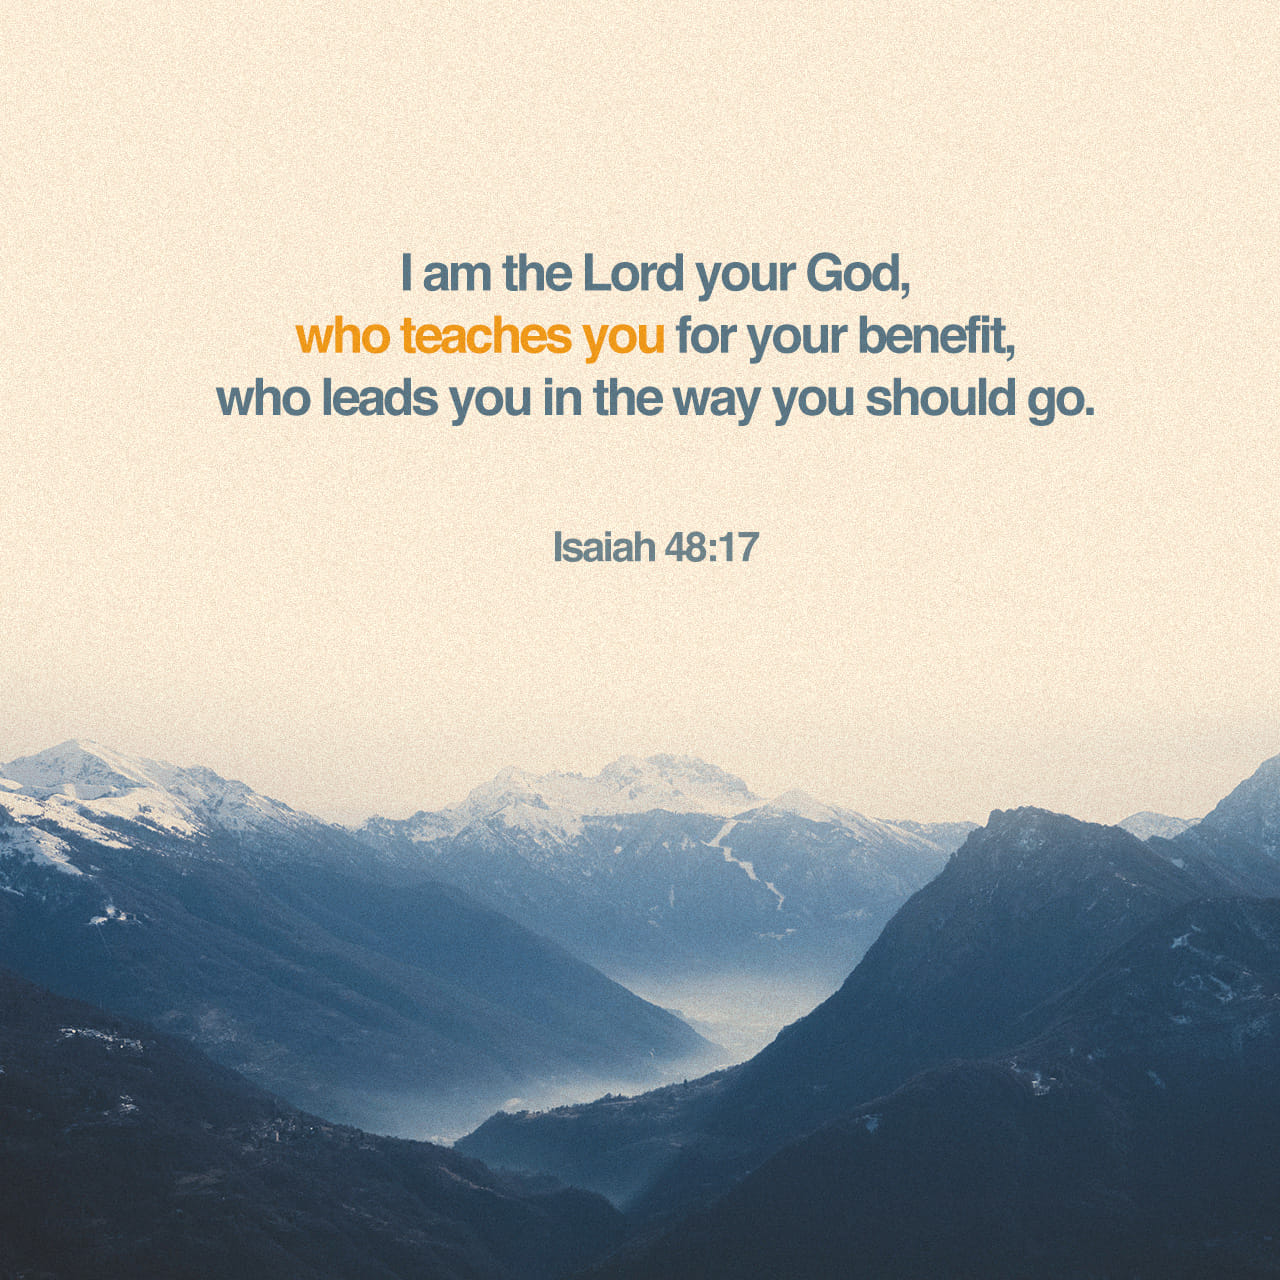 Isaiah 48:17 Compare All Versions | The Bible App | Bible.com